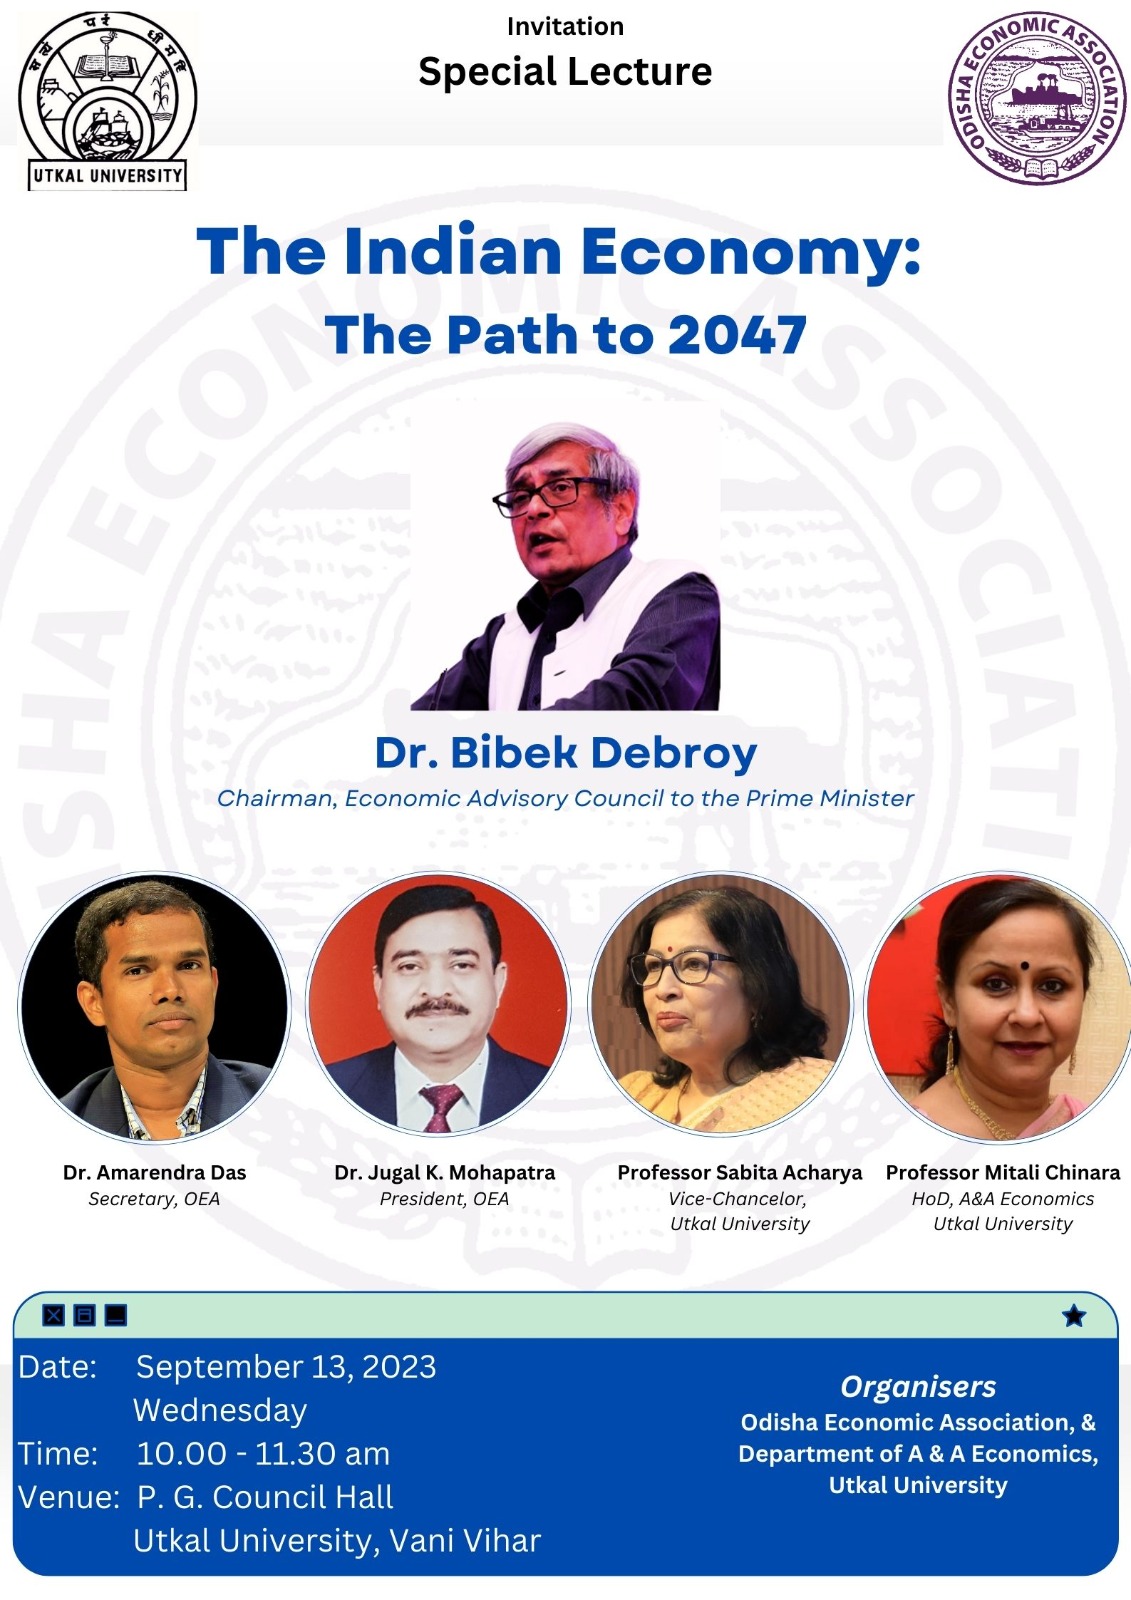 A special Lecture on “The Indian Economy: The Path to 2047” on 13th September, 2023 by Dr. Bibek Debroy, Chairman, Economic Advisory Council to the Prime Minister in collaboration with OEA